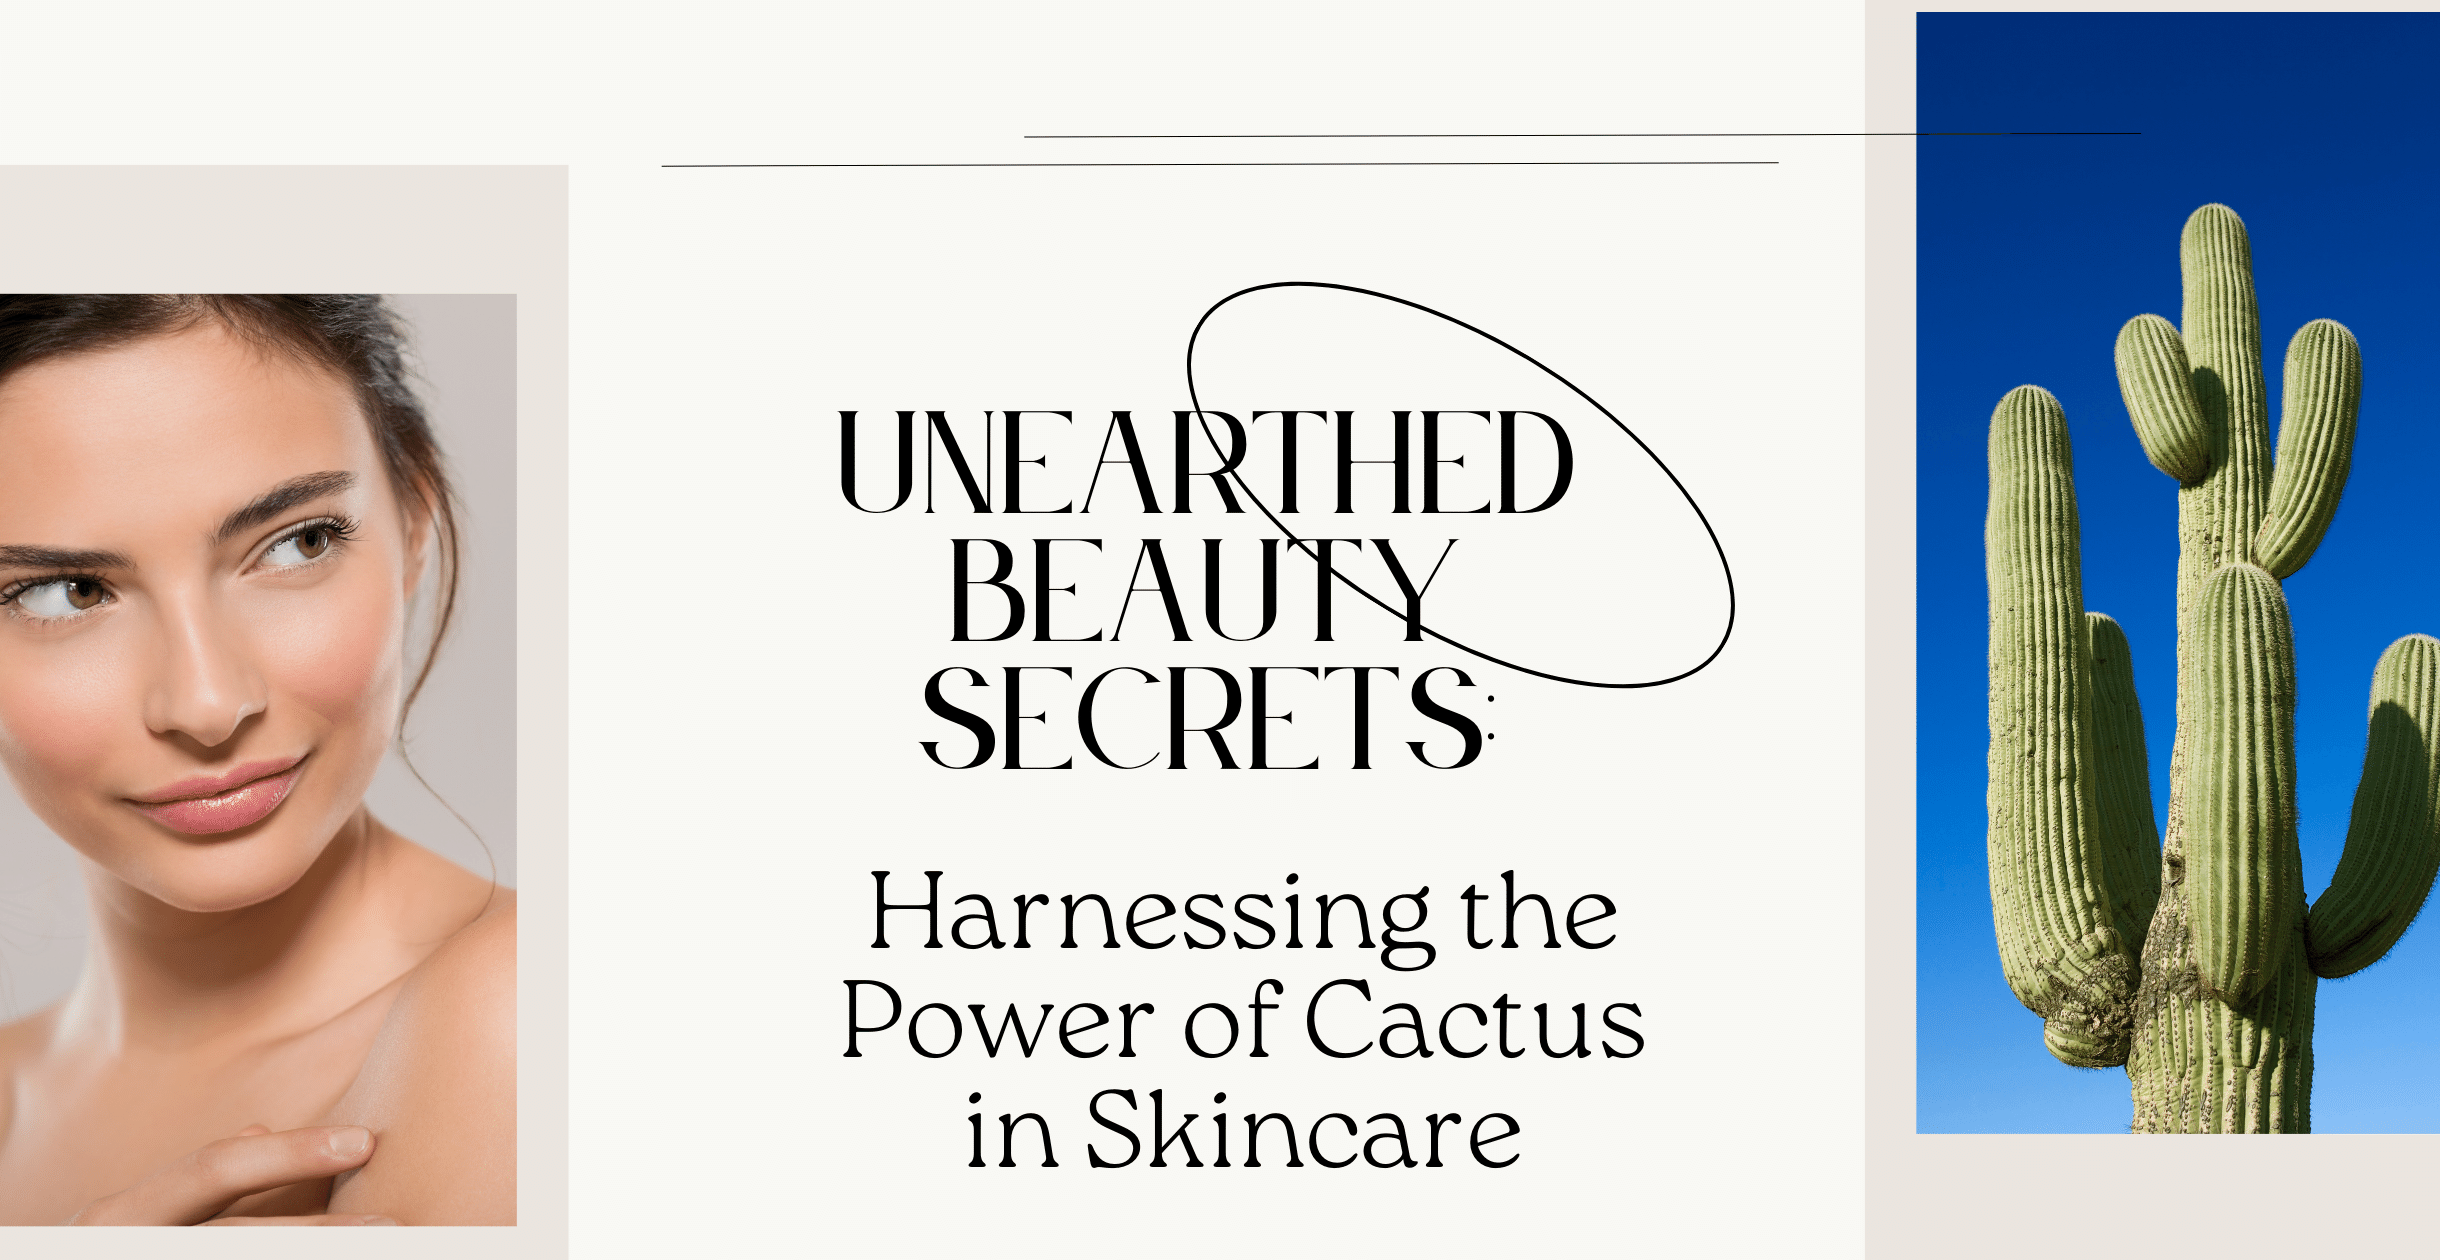 Unearthed Beauty Secrets: Harnessing the Power of Cactus in Skincare